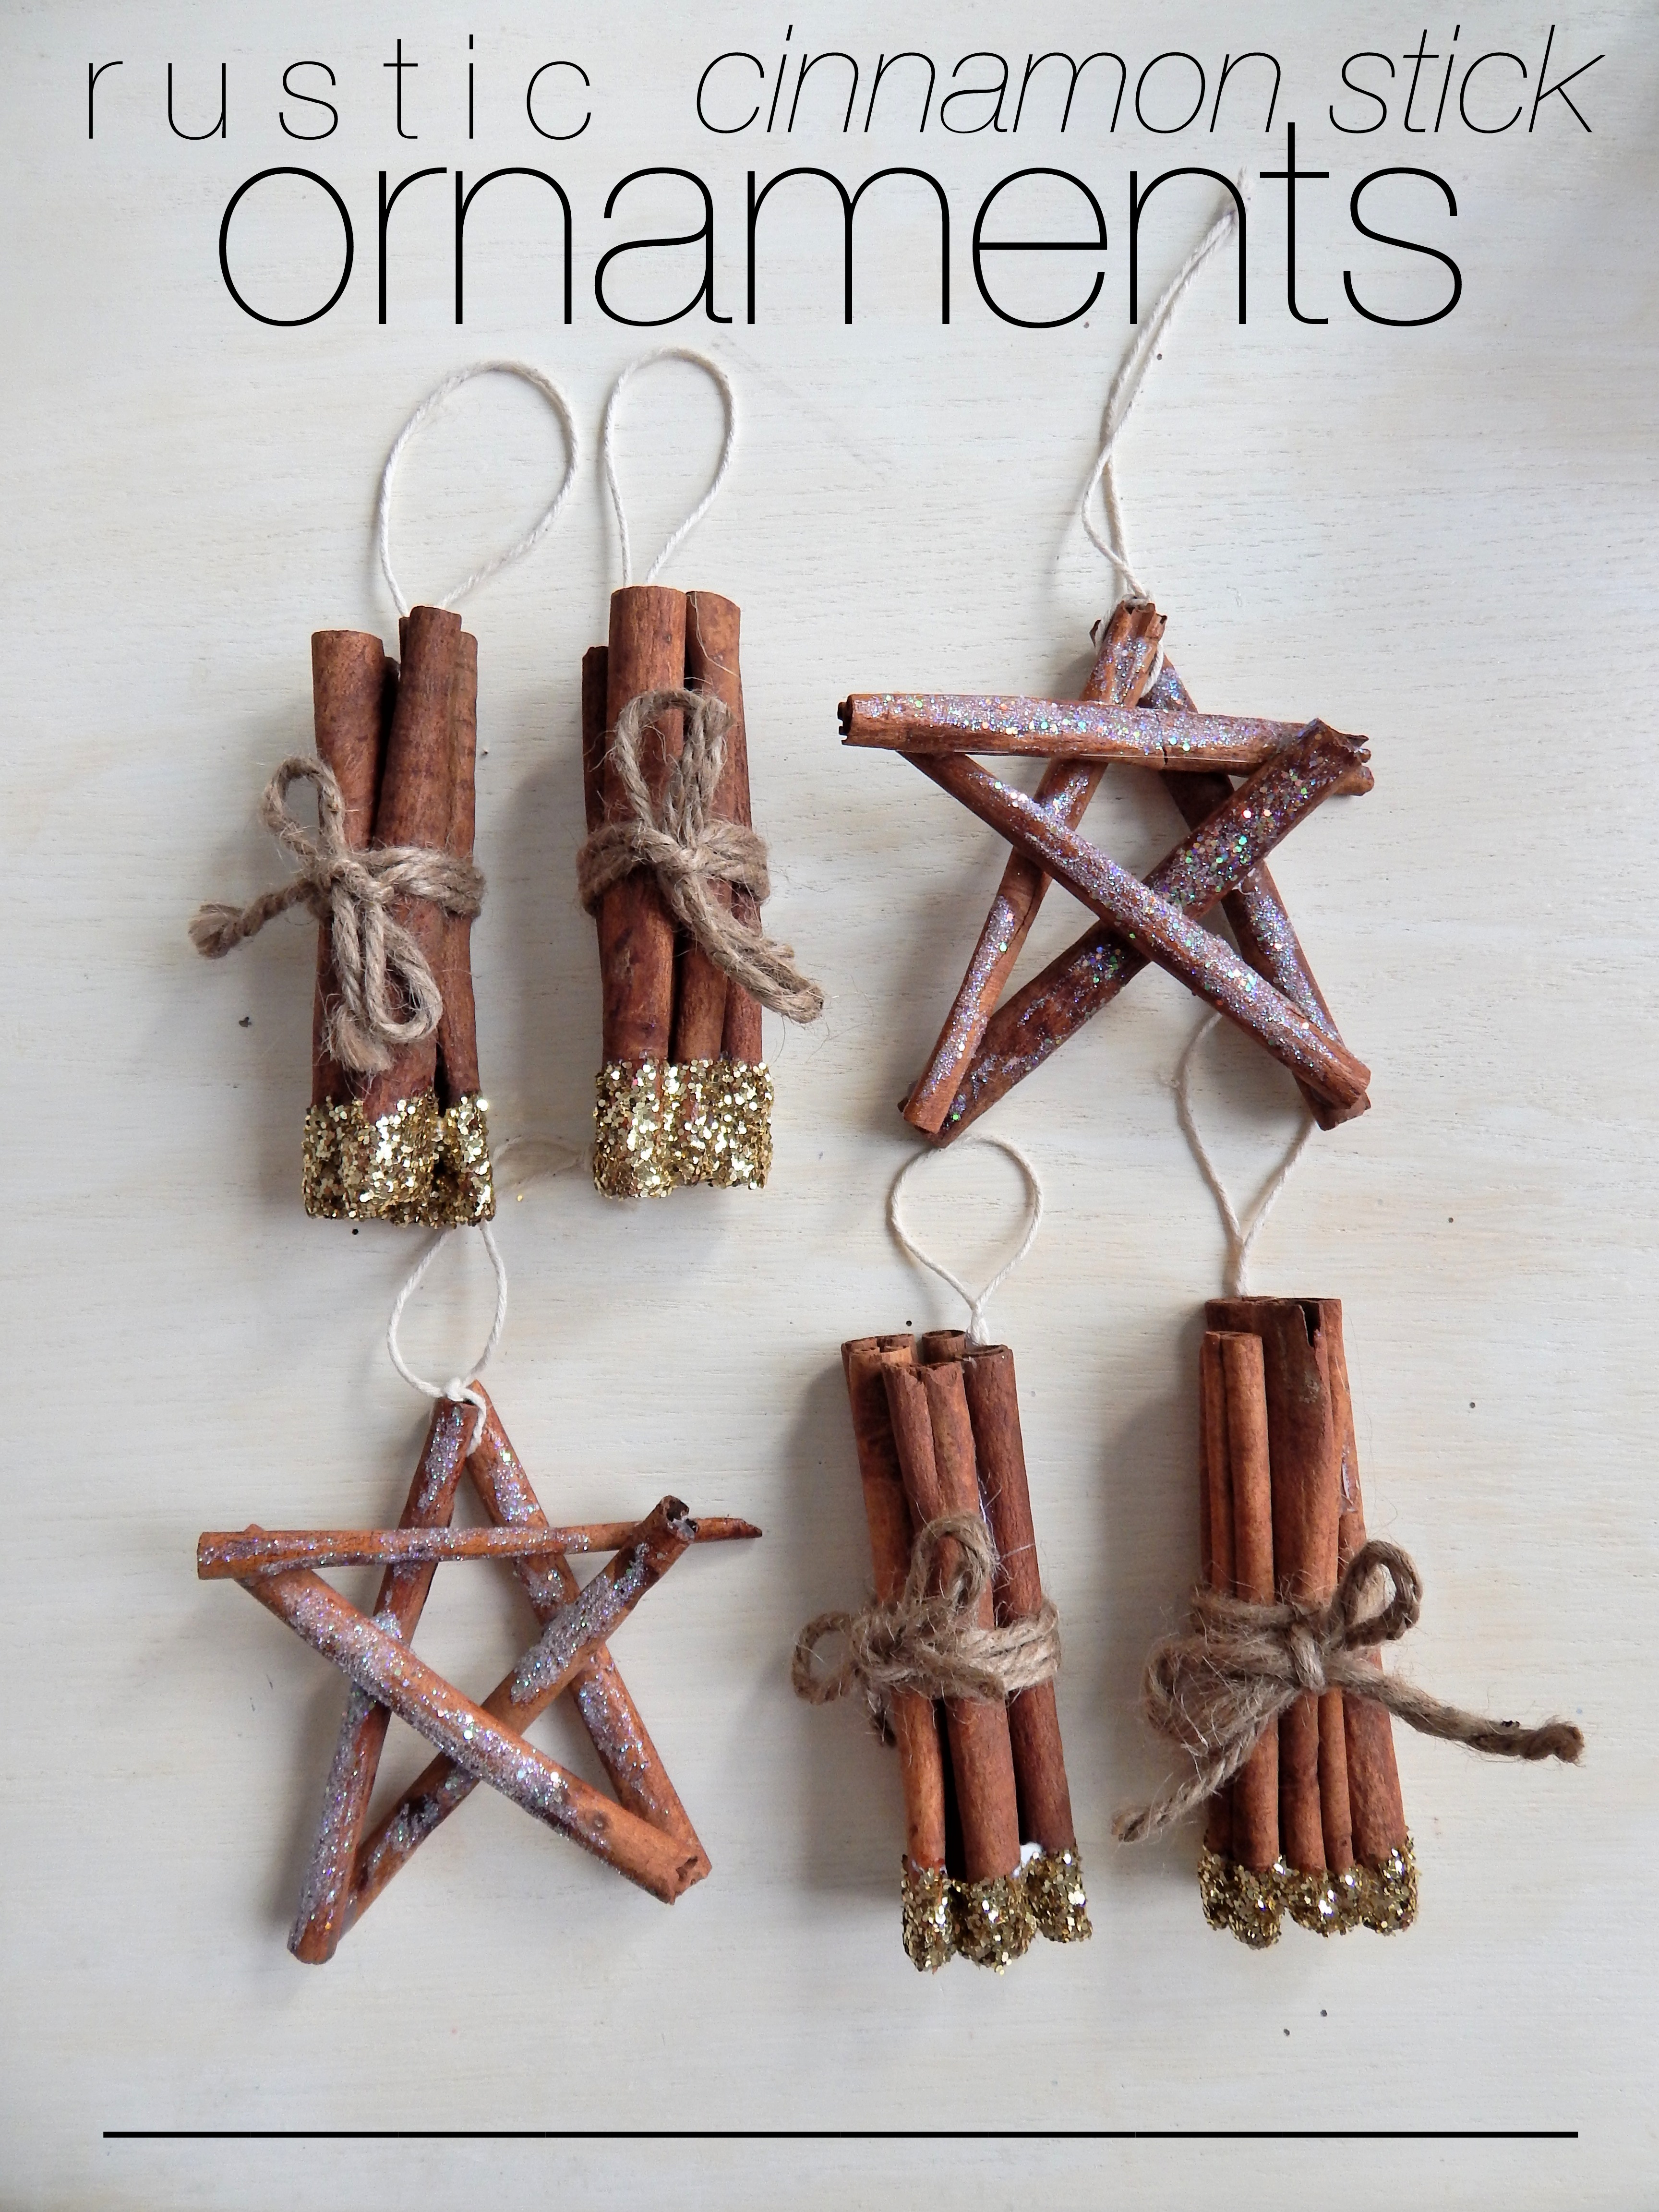 Rustic Cinnamon Stick Ornaments | 50 Awesome DIY Yule Decorations and Craft Ideas You Can Make for the Winter Solstice